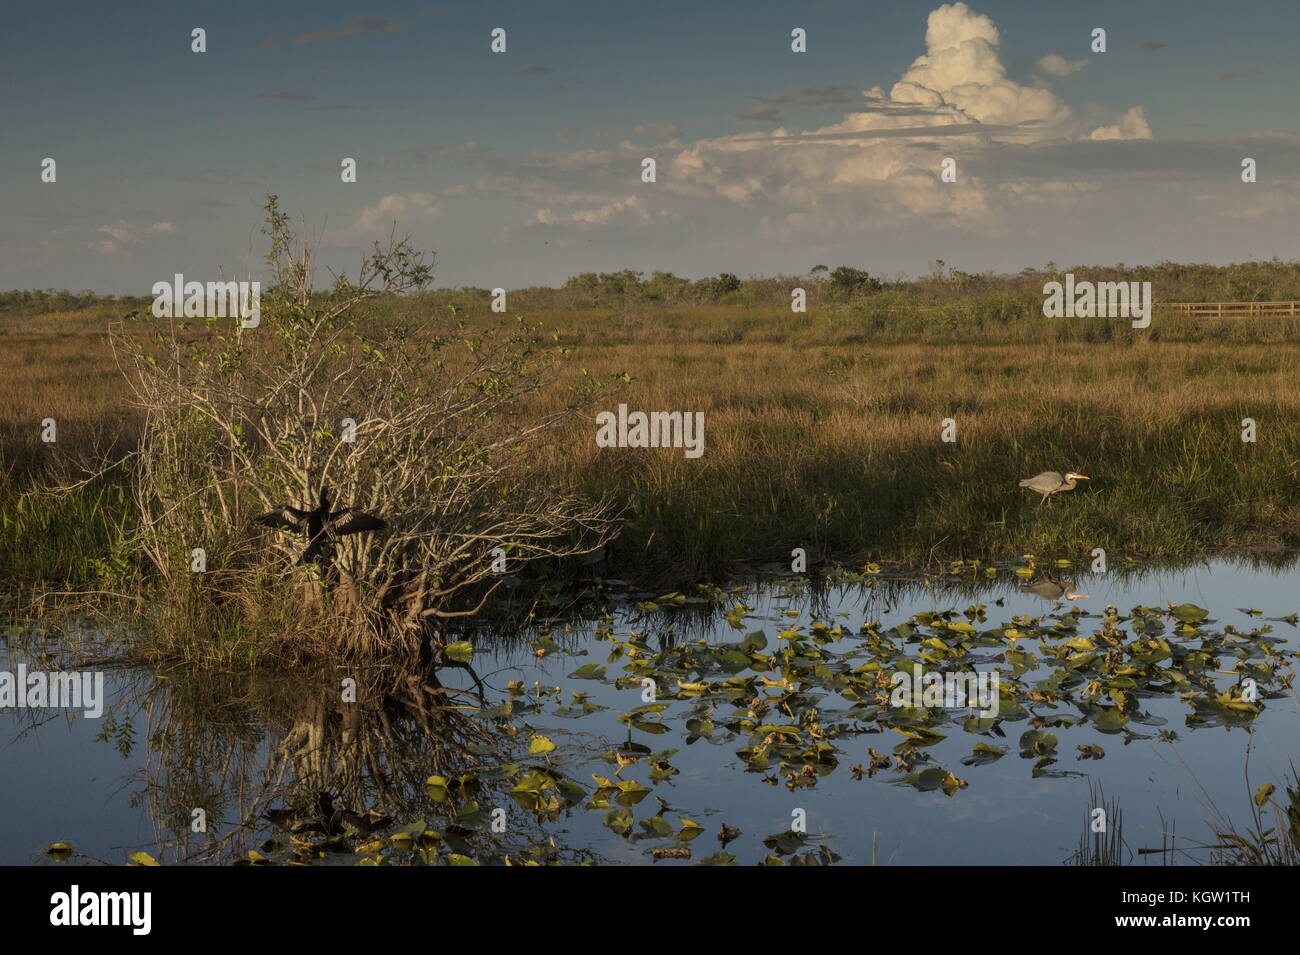 Pond apple trees, Annona glabra, with Great Blue Heron in the Everglades National Park, along the Anhinga trail. Florida. Stock Photo